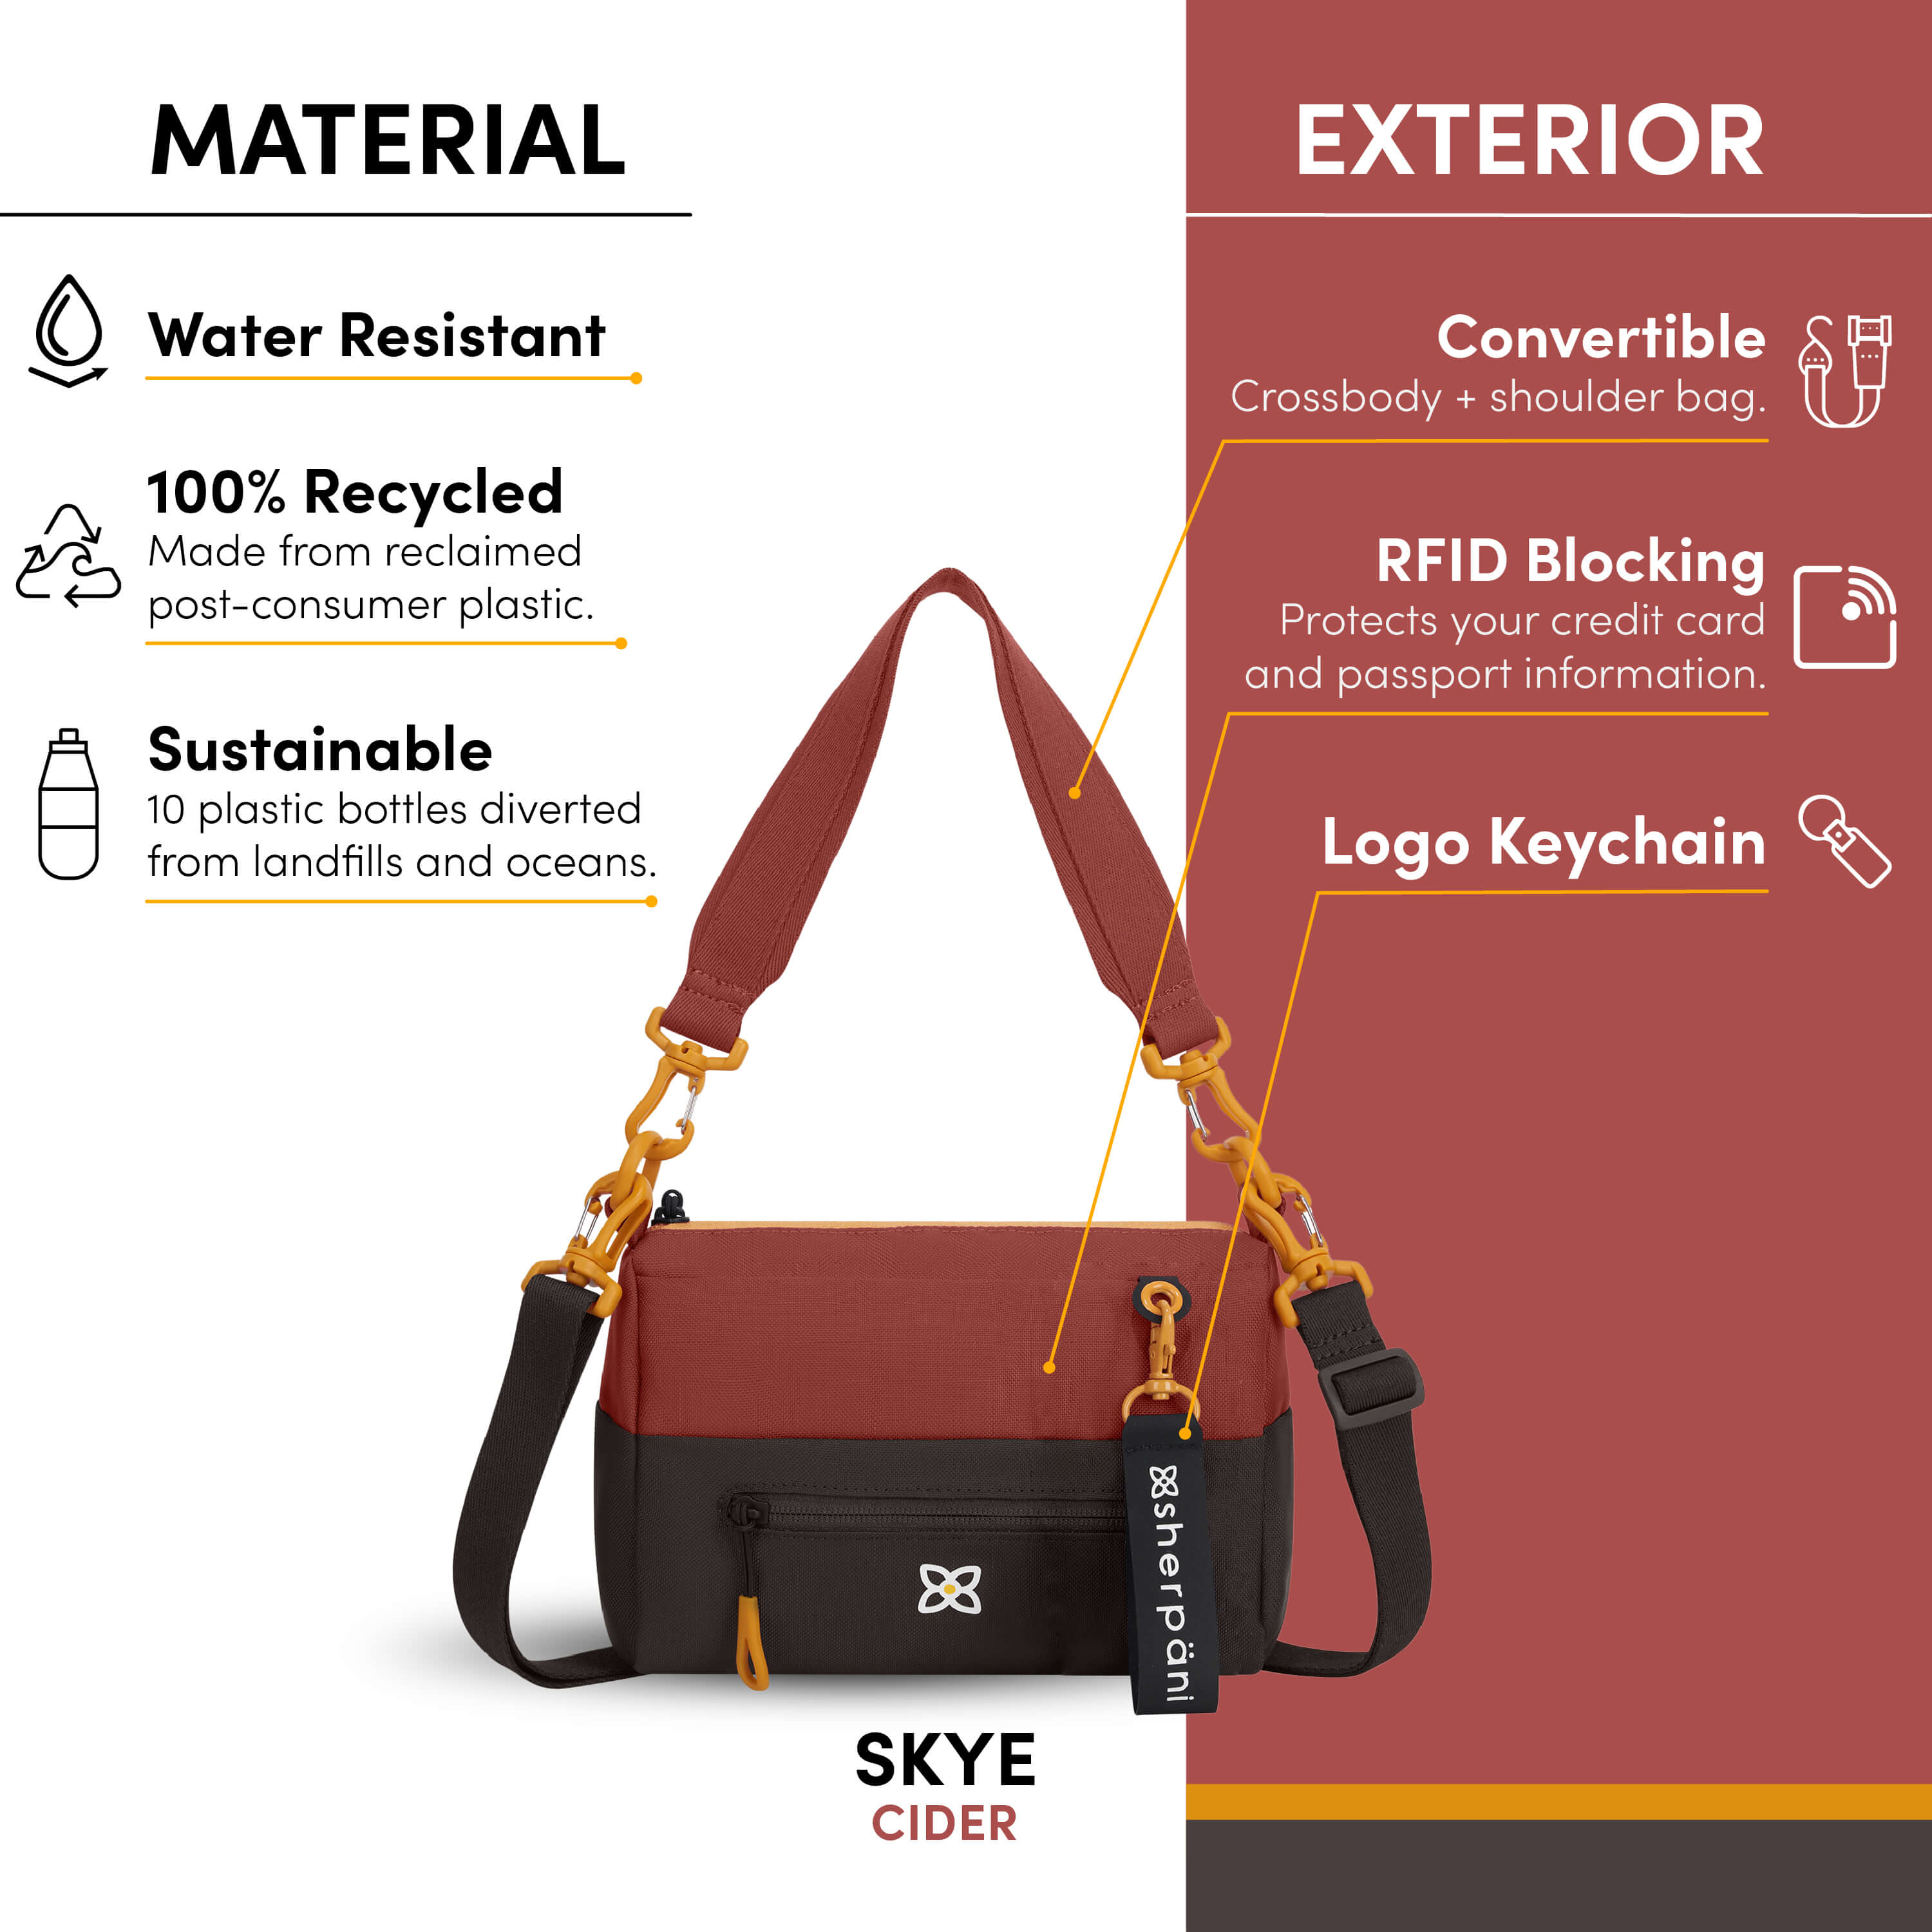 Buy Shoulder Bags Products - Women's Bags